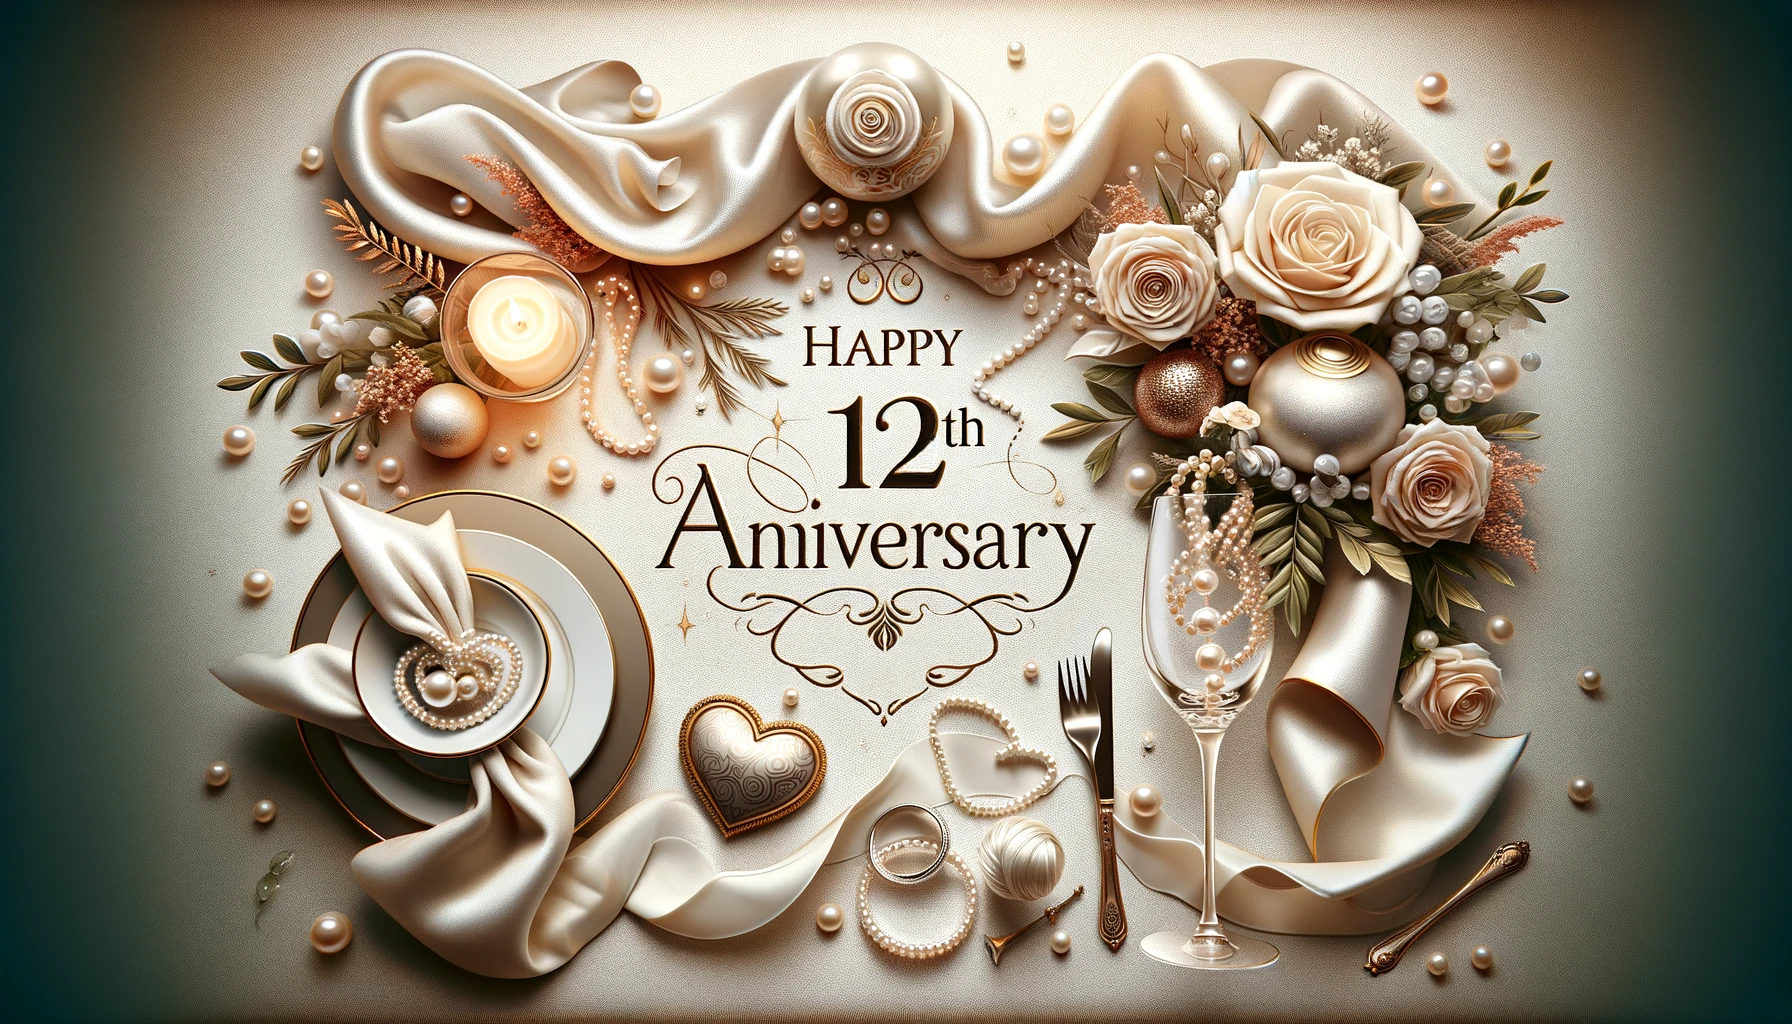 A featured image for an article about celebrating a 12th wedding anniversary, incorporating elements that represent both traditional